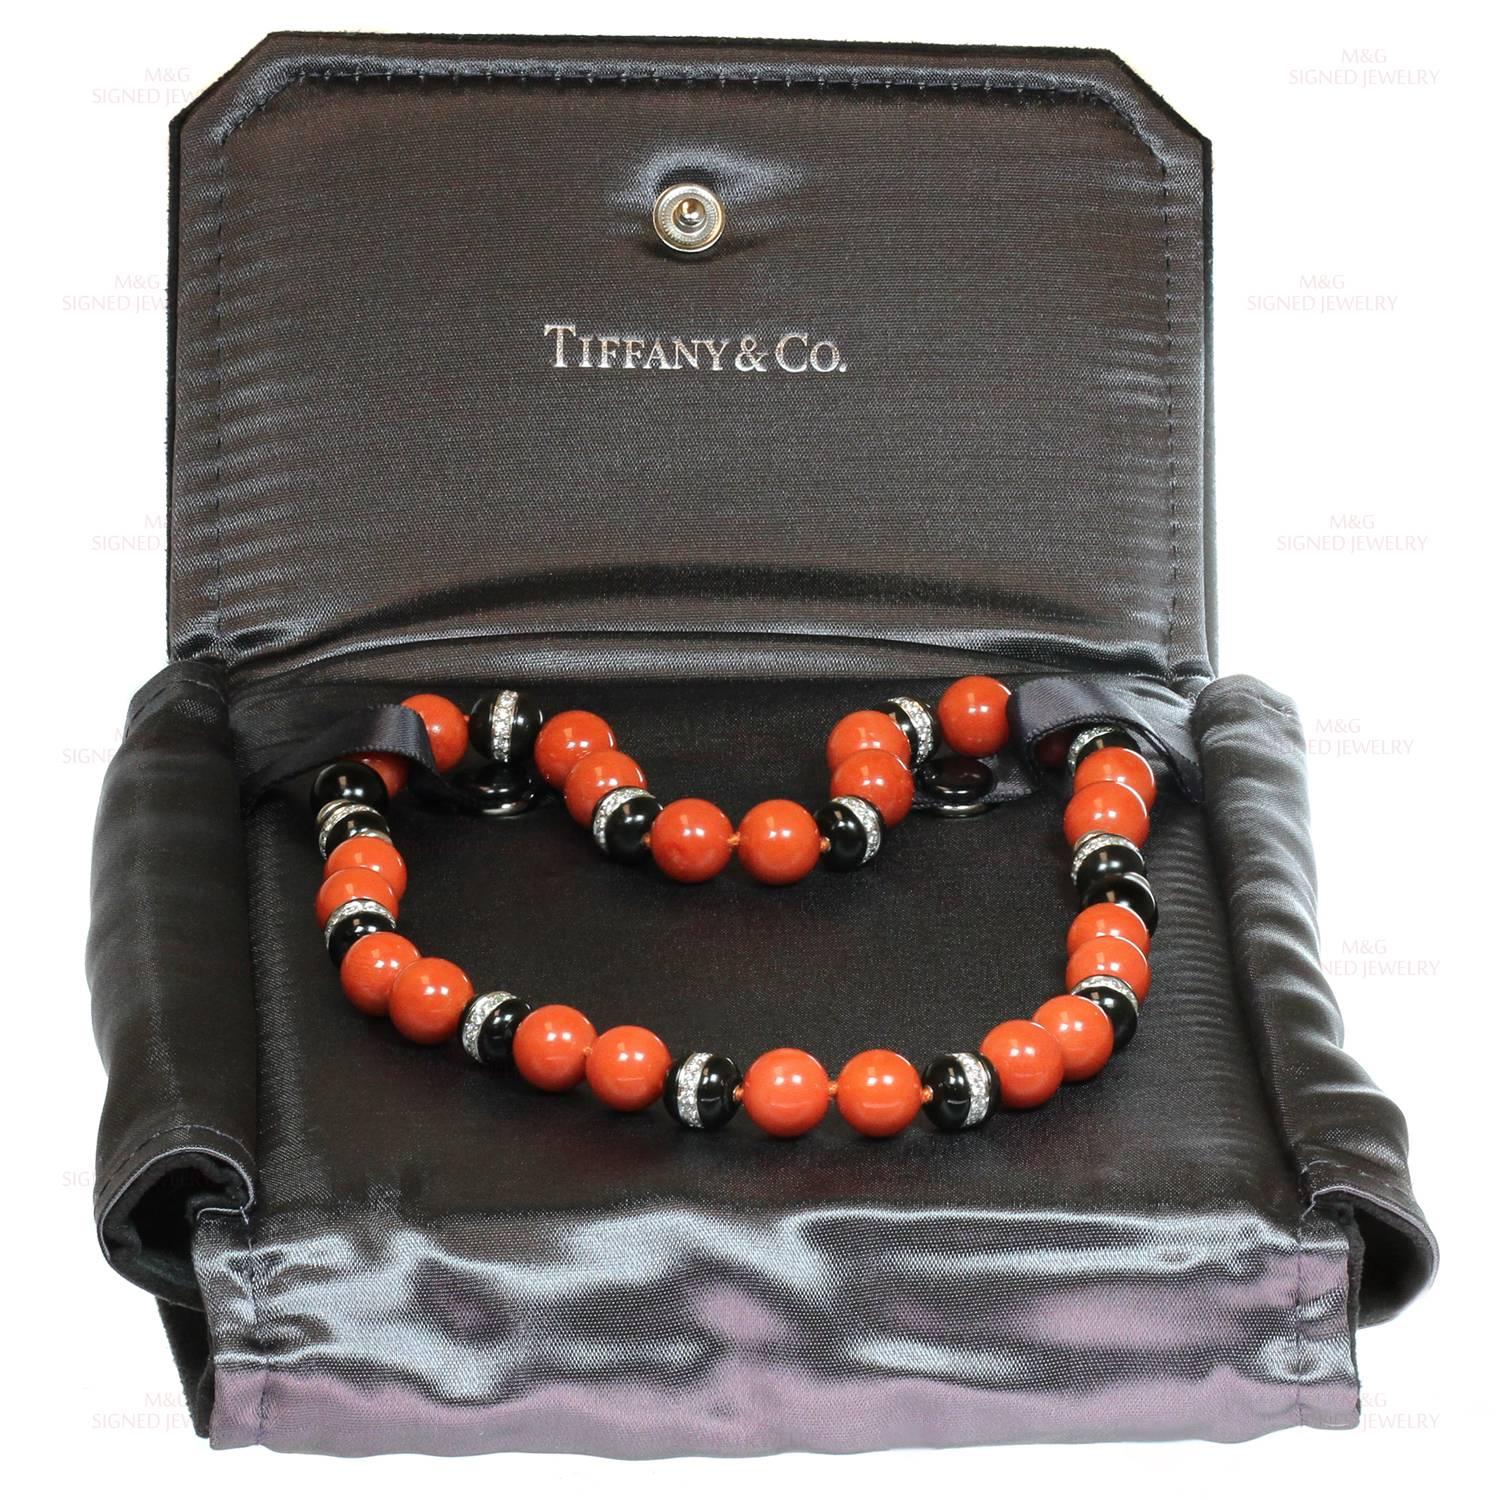 This fabulous pair of platinum Tiffany bracelets feature red oxblood coral beads alternating with black onyx beads accented with briliant-cut round diamonds of an estimated 4.75 carats. These versatile bracelets can be converted into a necklace.